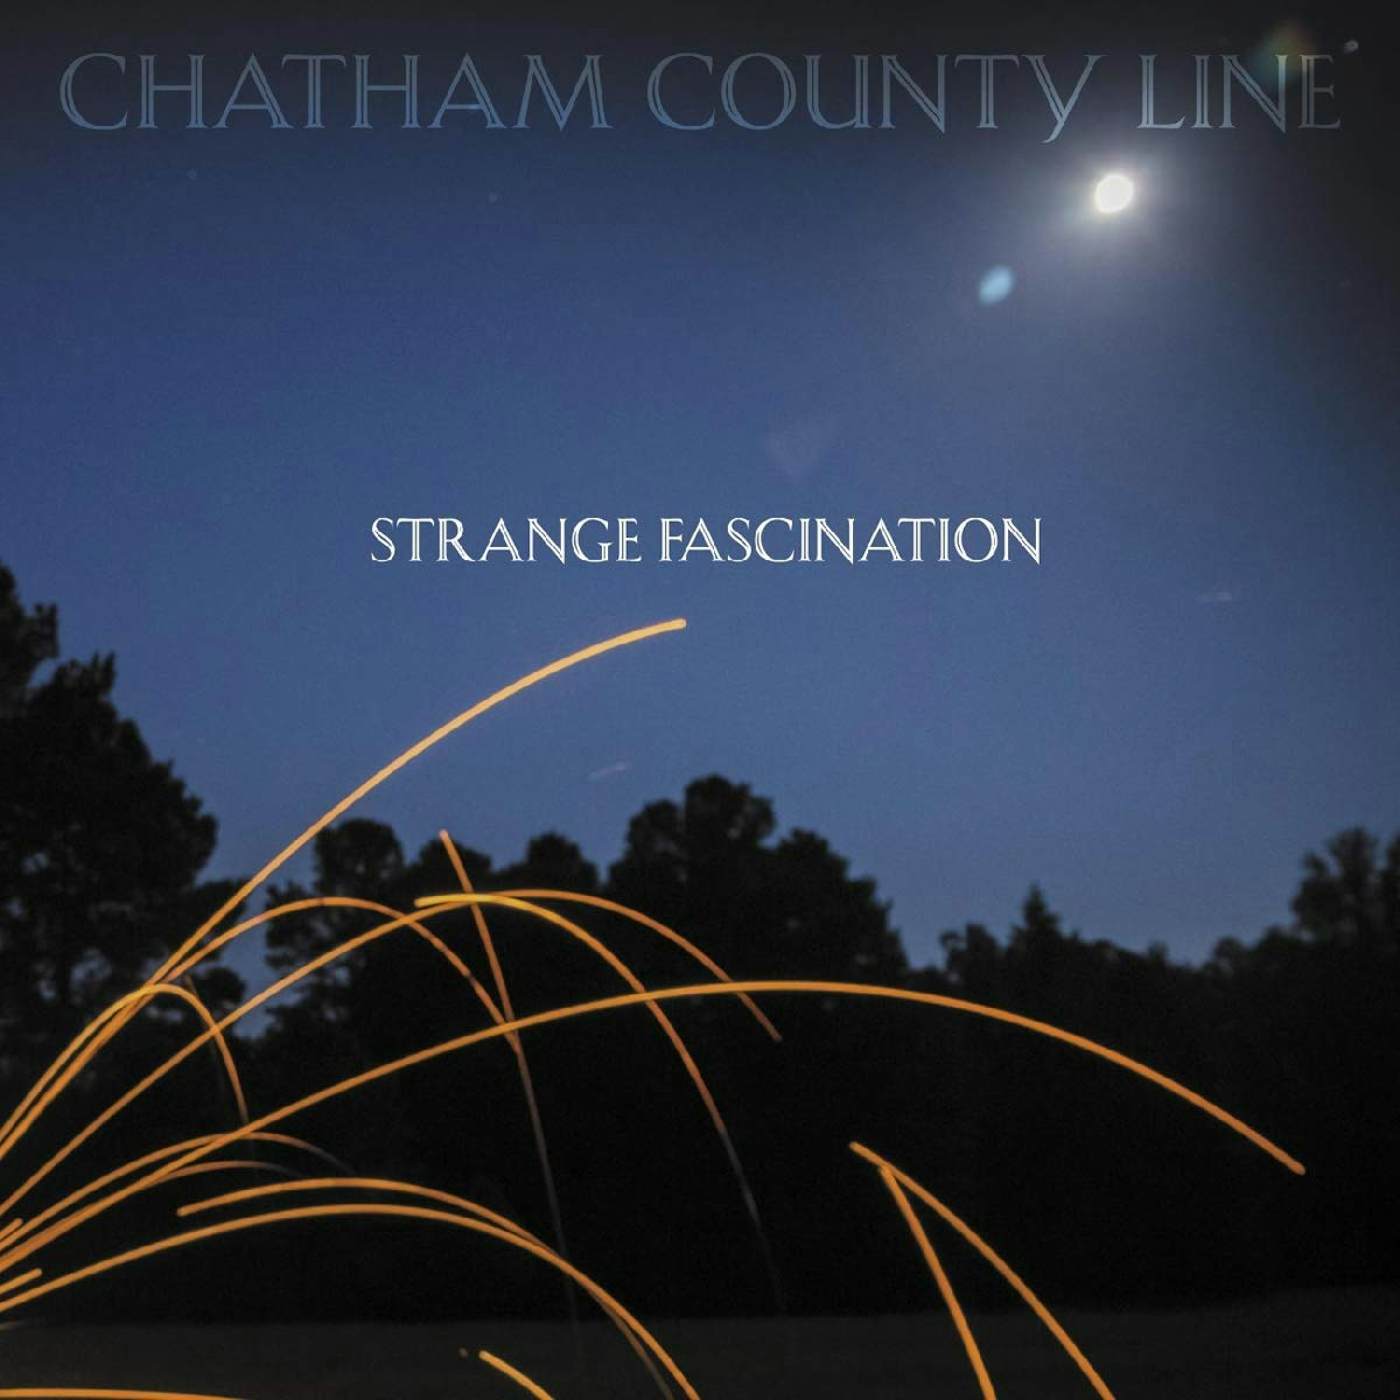 Chatham County Line Strange Fascination (First Edition) Vinyl Record